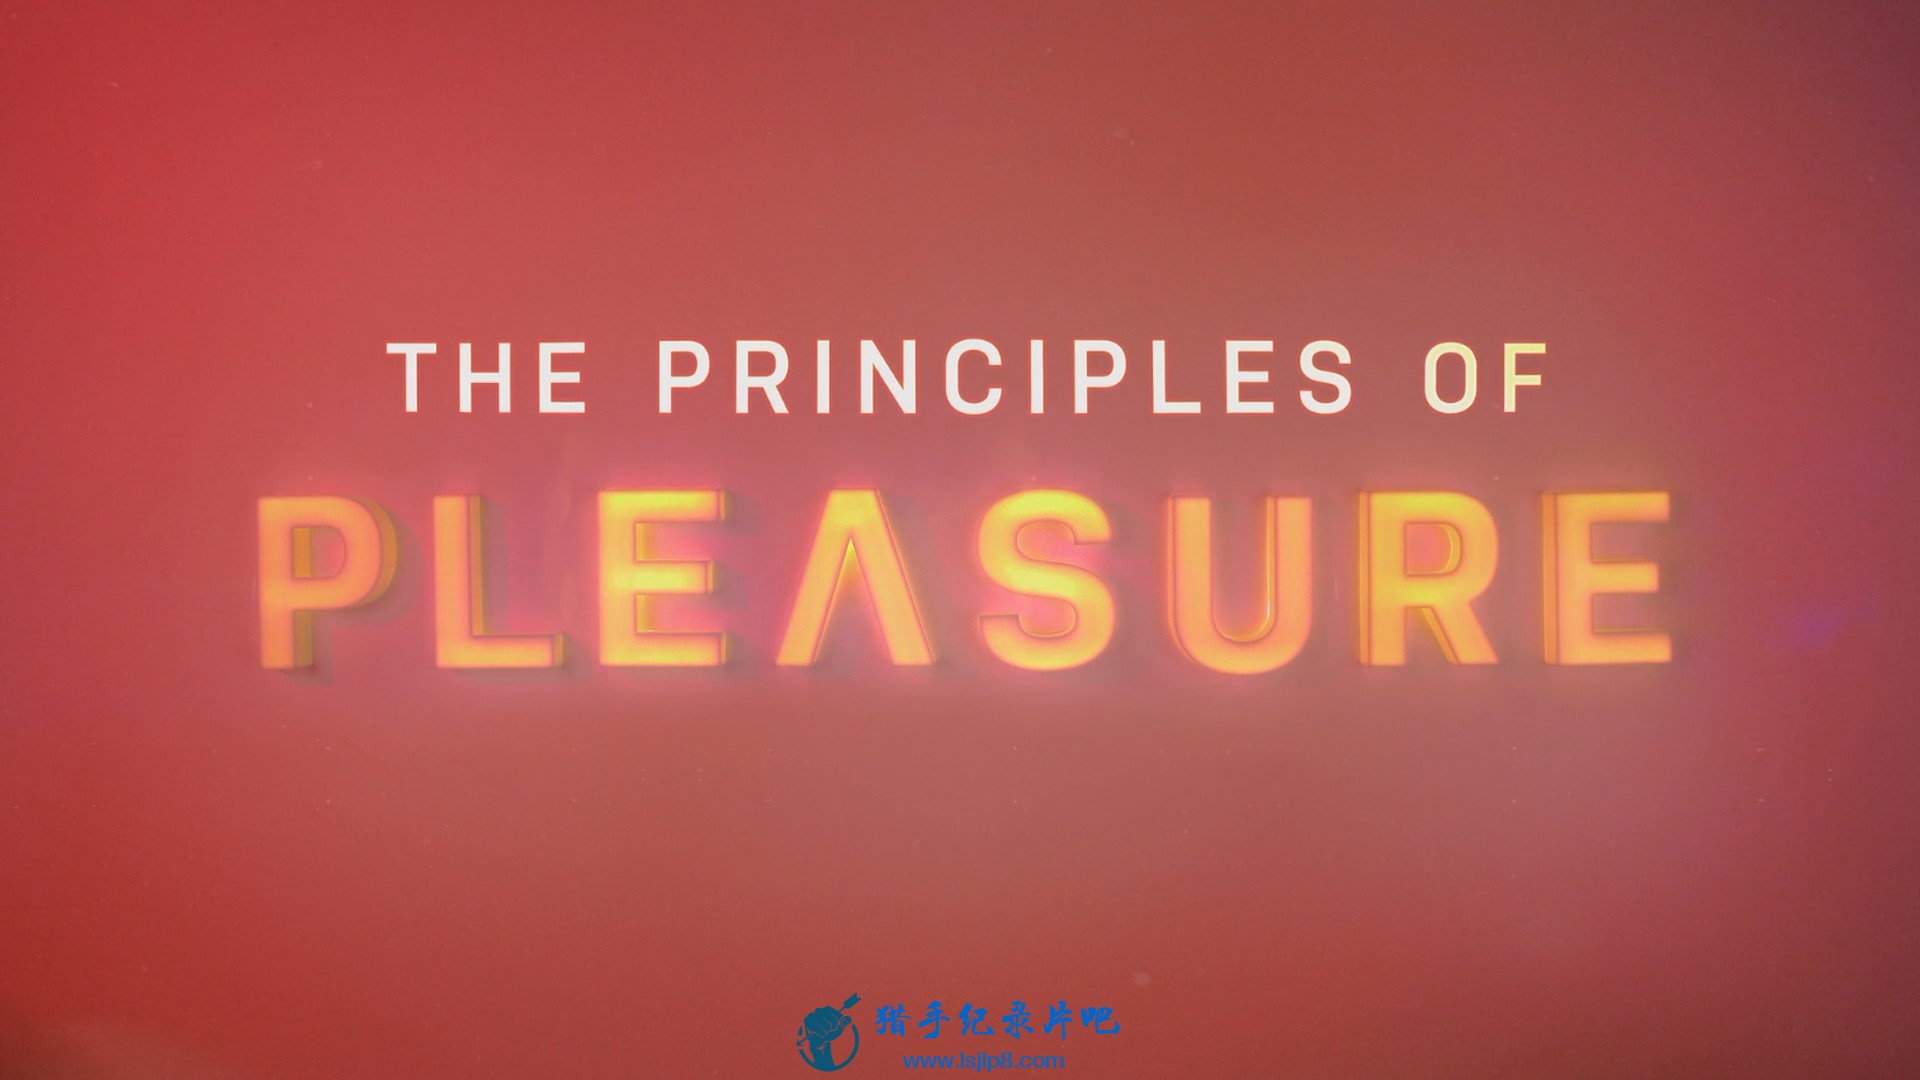 The.Principles.of.Pleasure.S01E01.Our.Bodies.1080p.NF.WEB-DL.DDP5.1.x264-TEPES.m.jpg